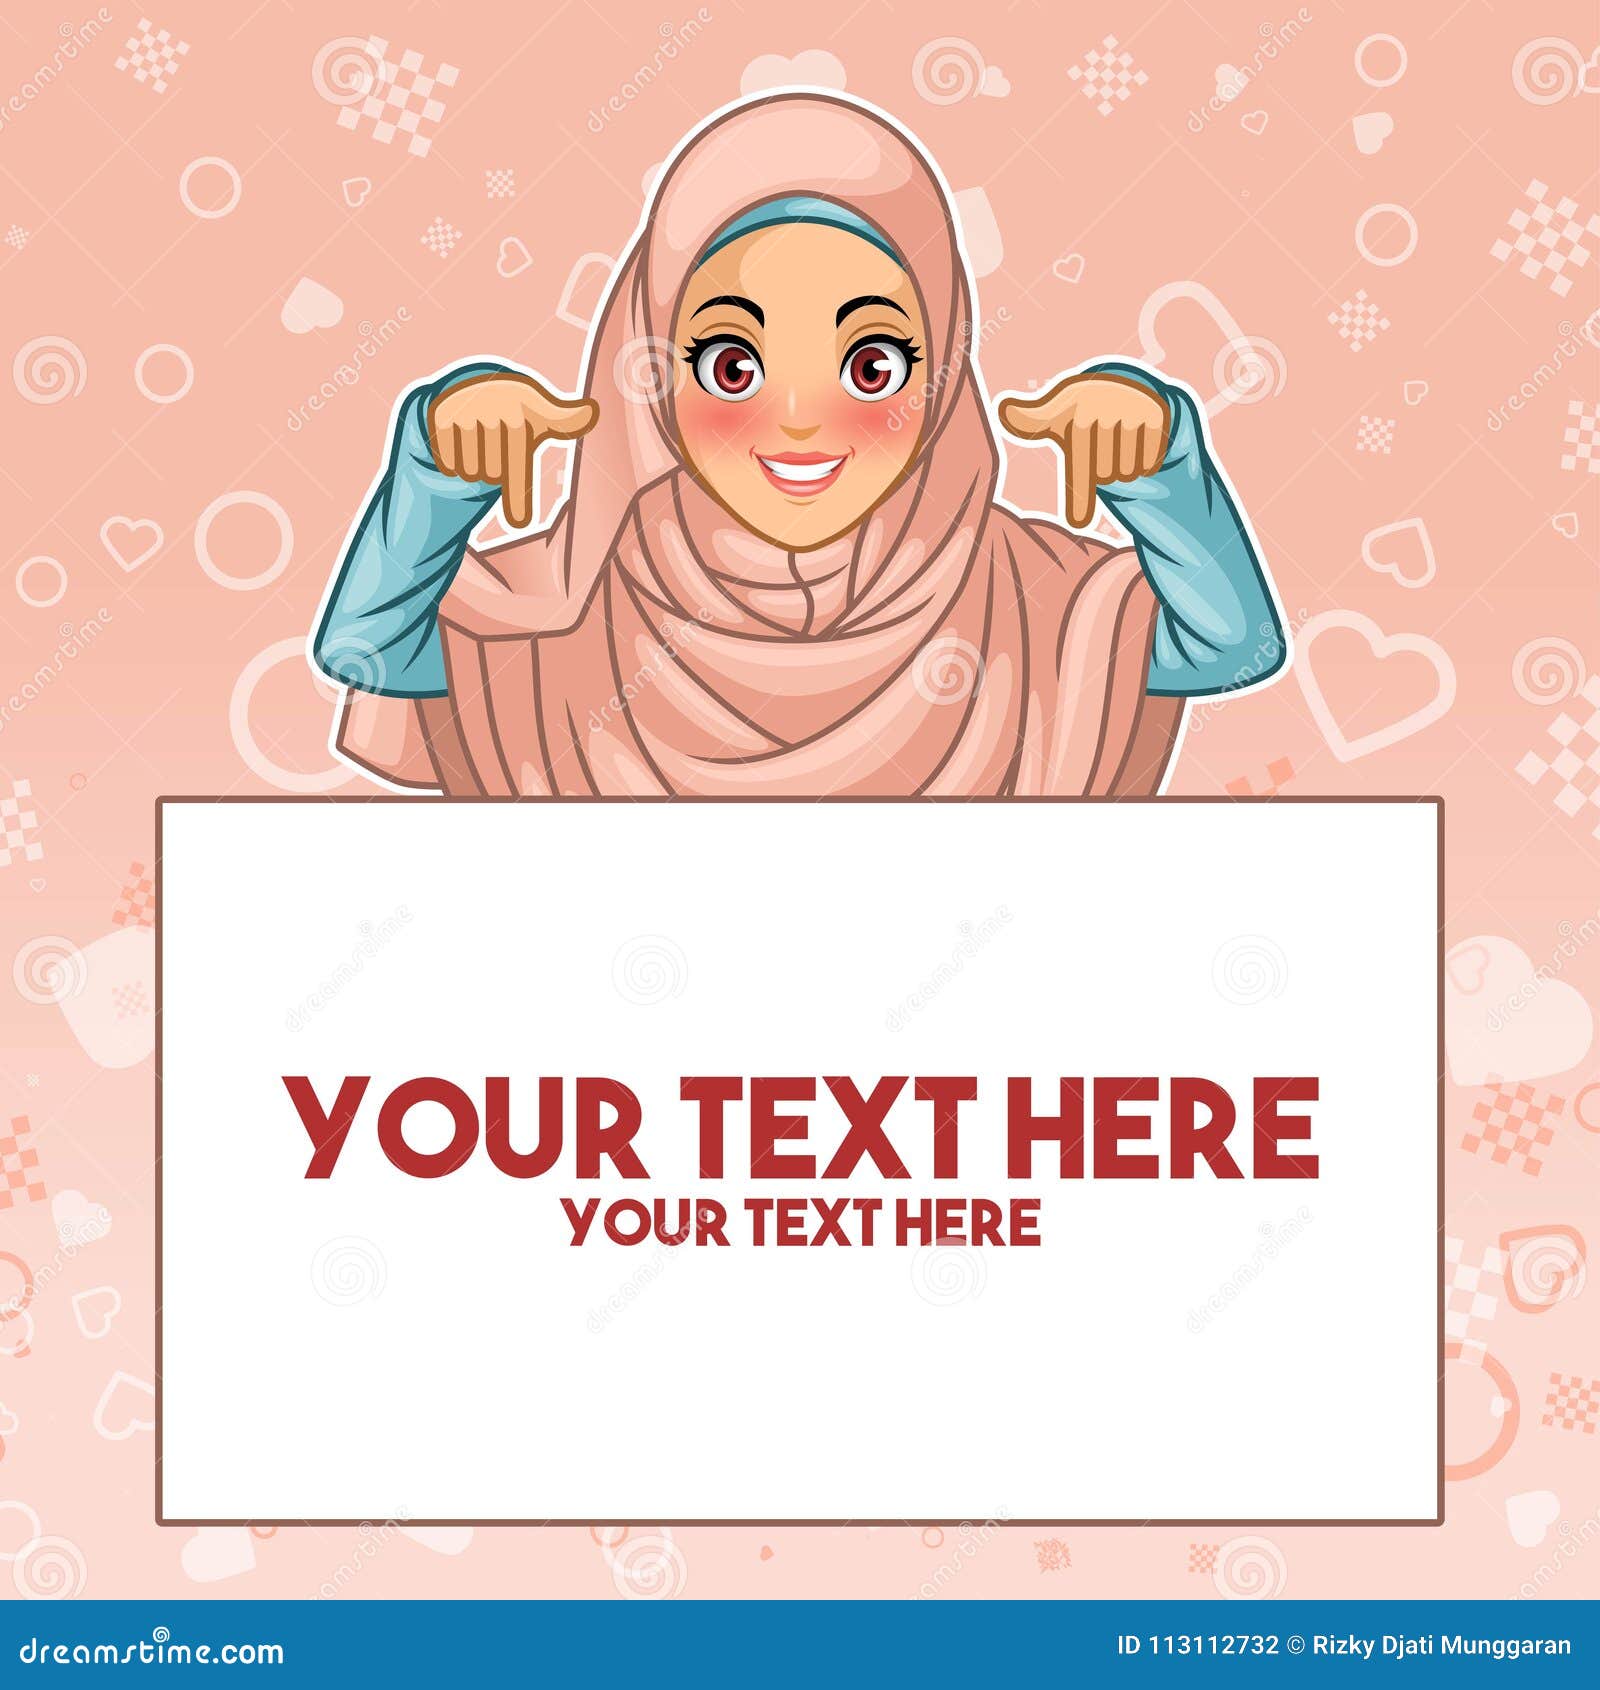 Back Side PNG Picture, Illustration Of The Back Side And Side Profile Of  Hijab Girl In Hand Drawn, Girl, Hijab Girl, Islam PNG Image For Free  Download